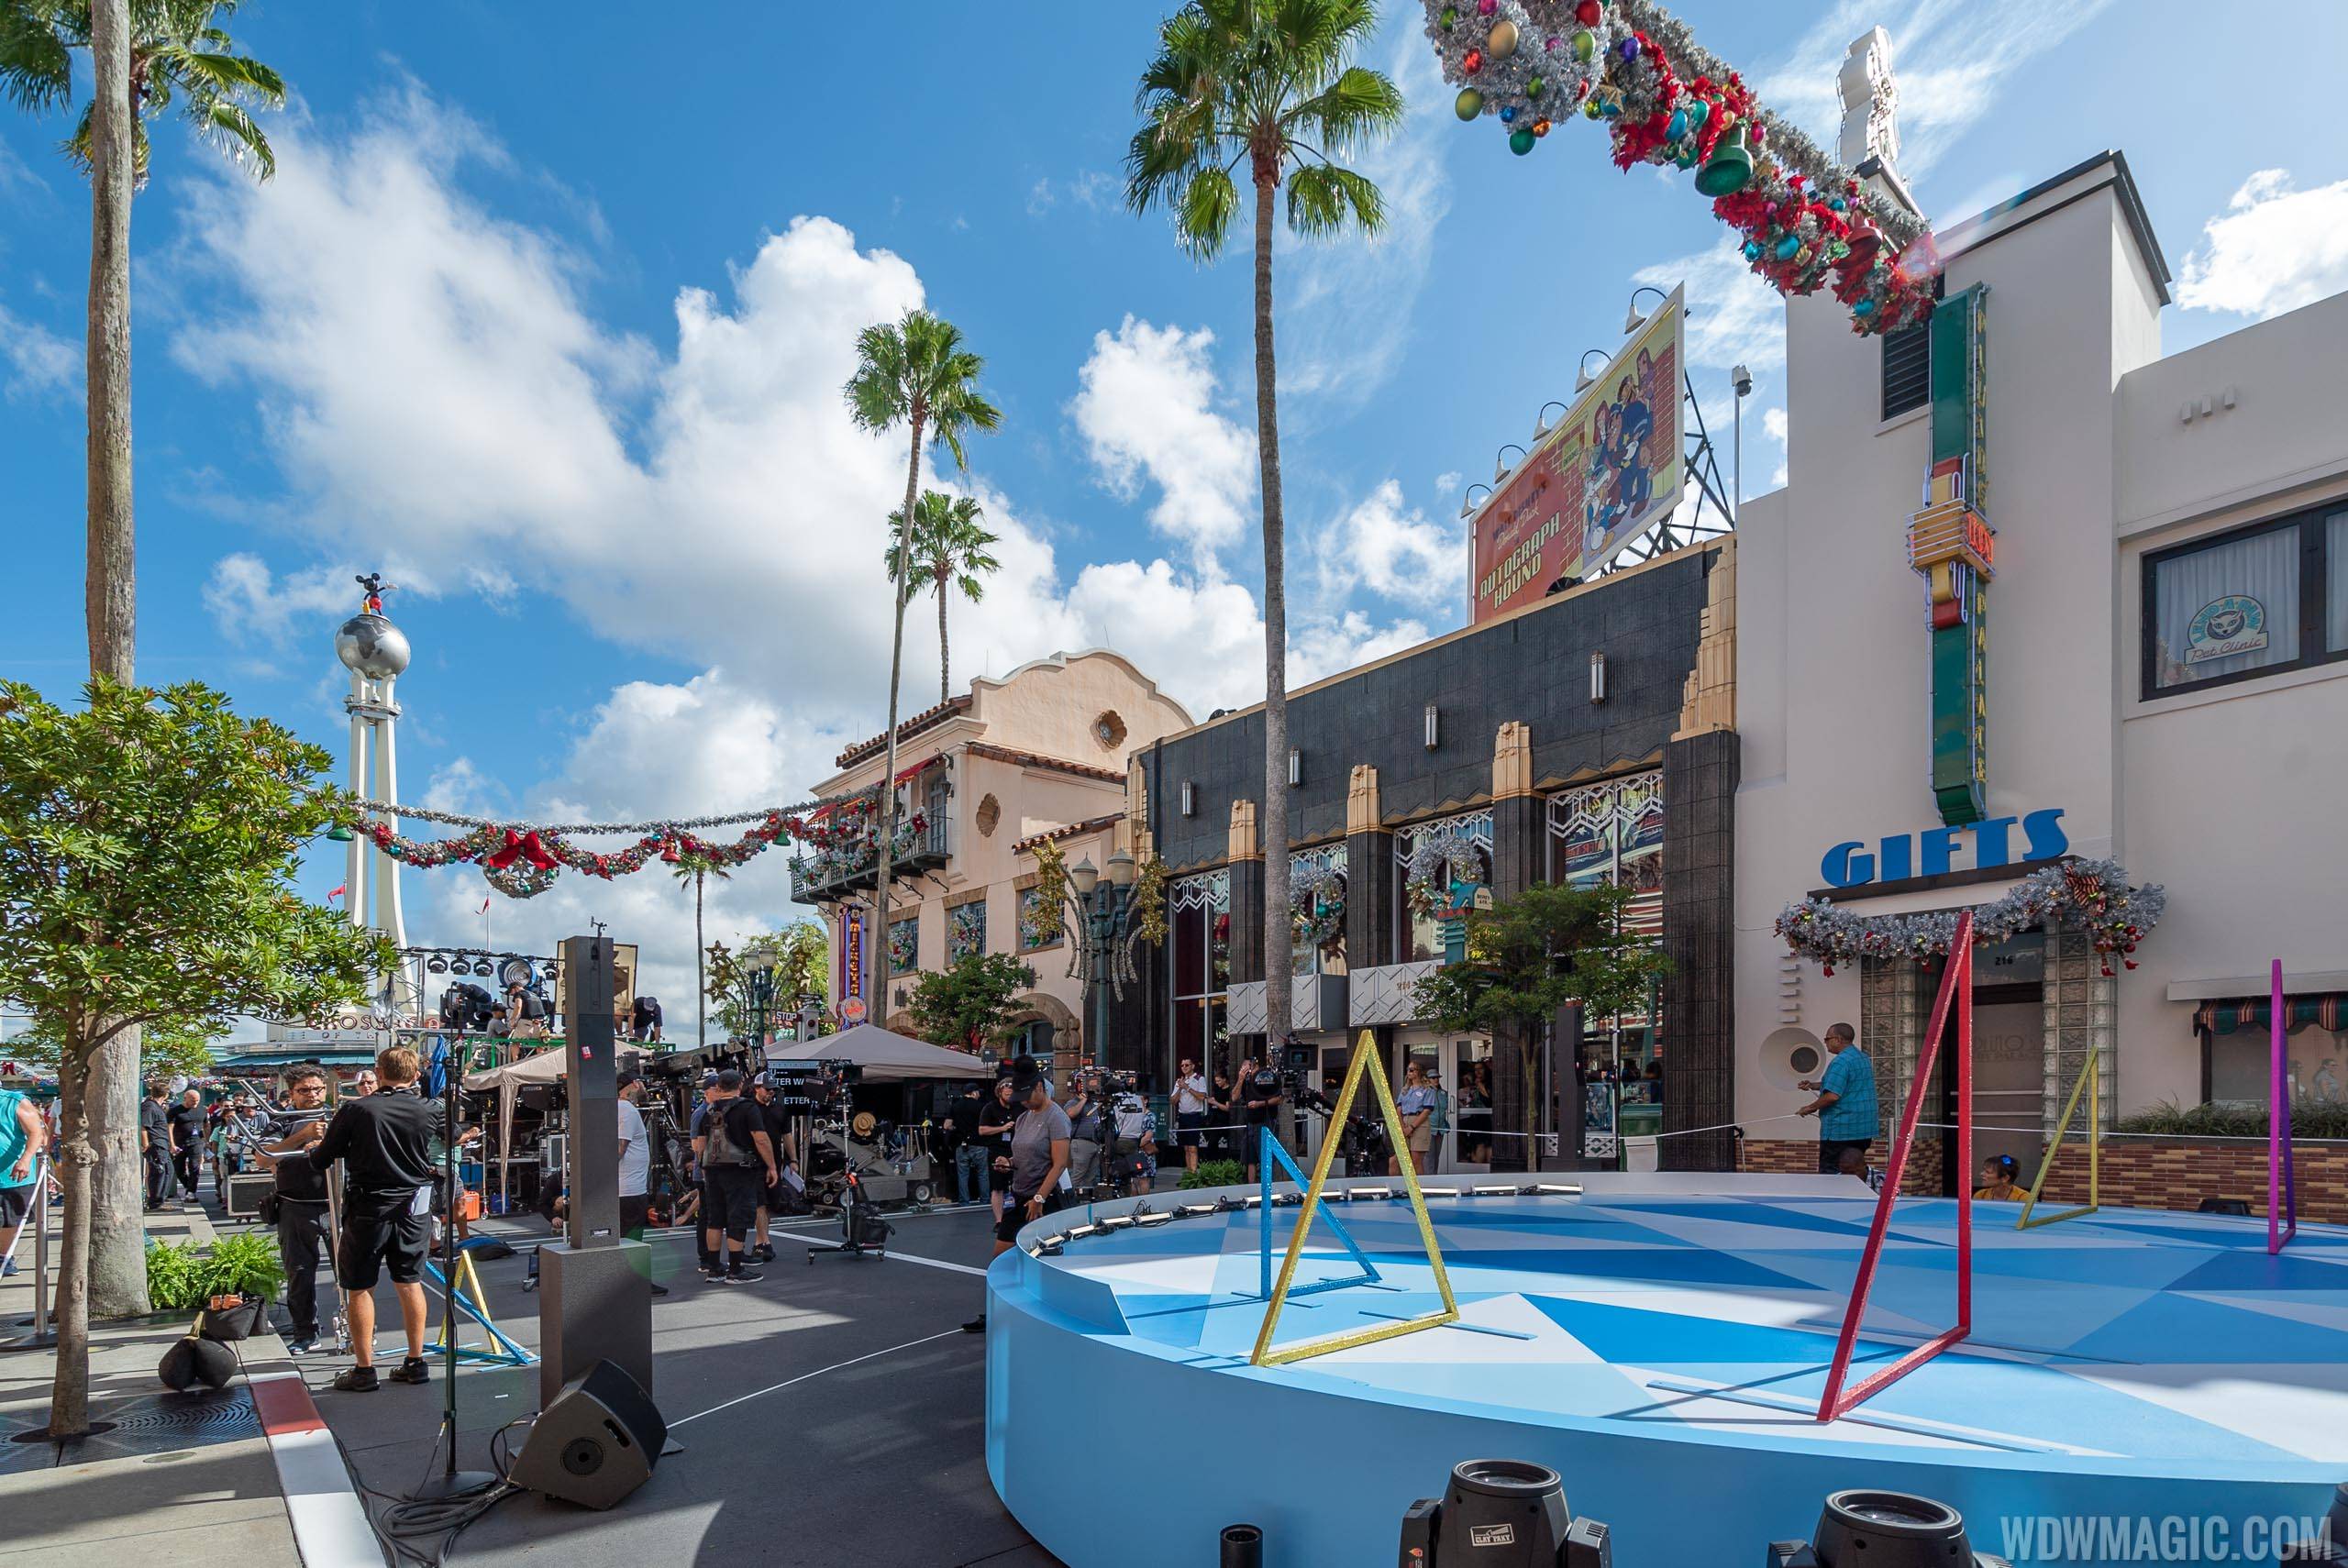 PHOTOS - ABC and Disney Channel Holiday Specials filming today at Disney's Hollywood Studios